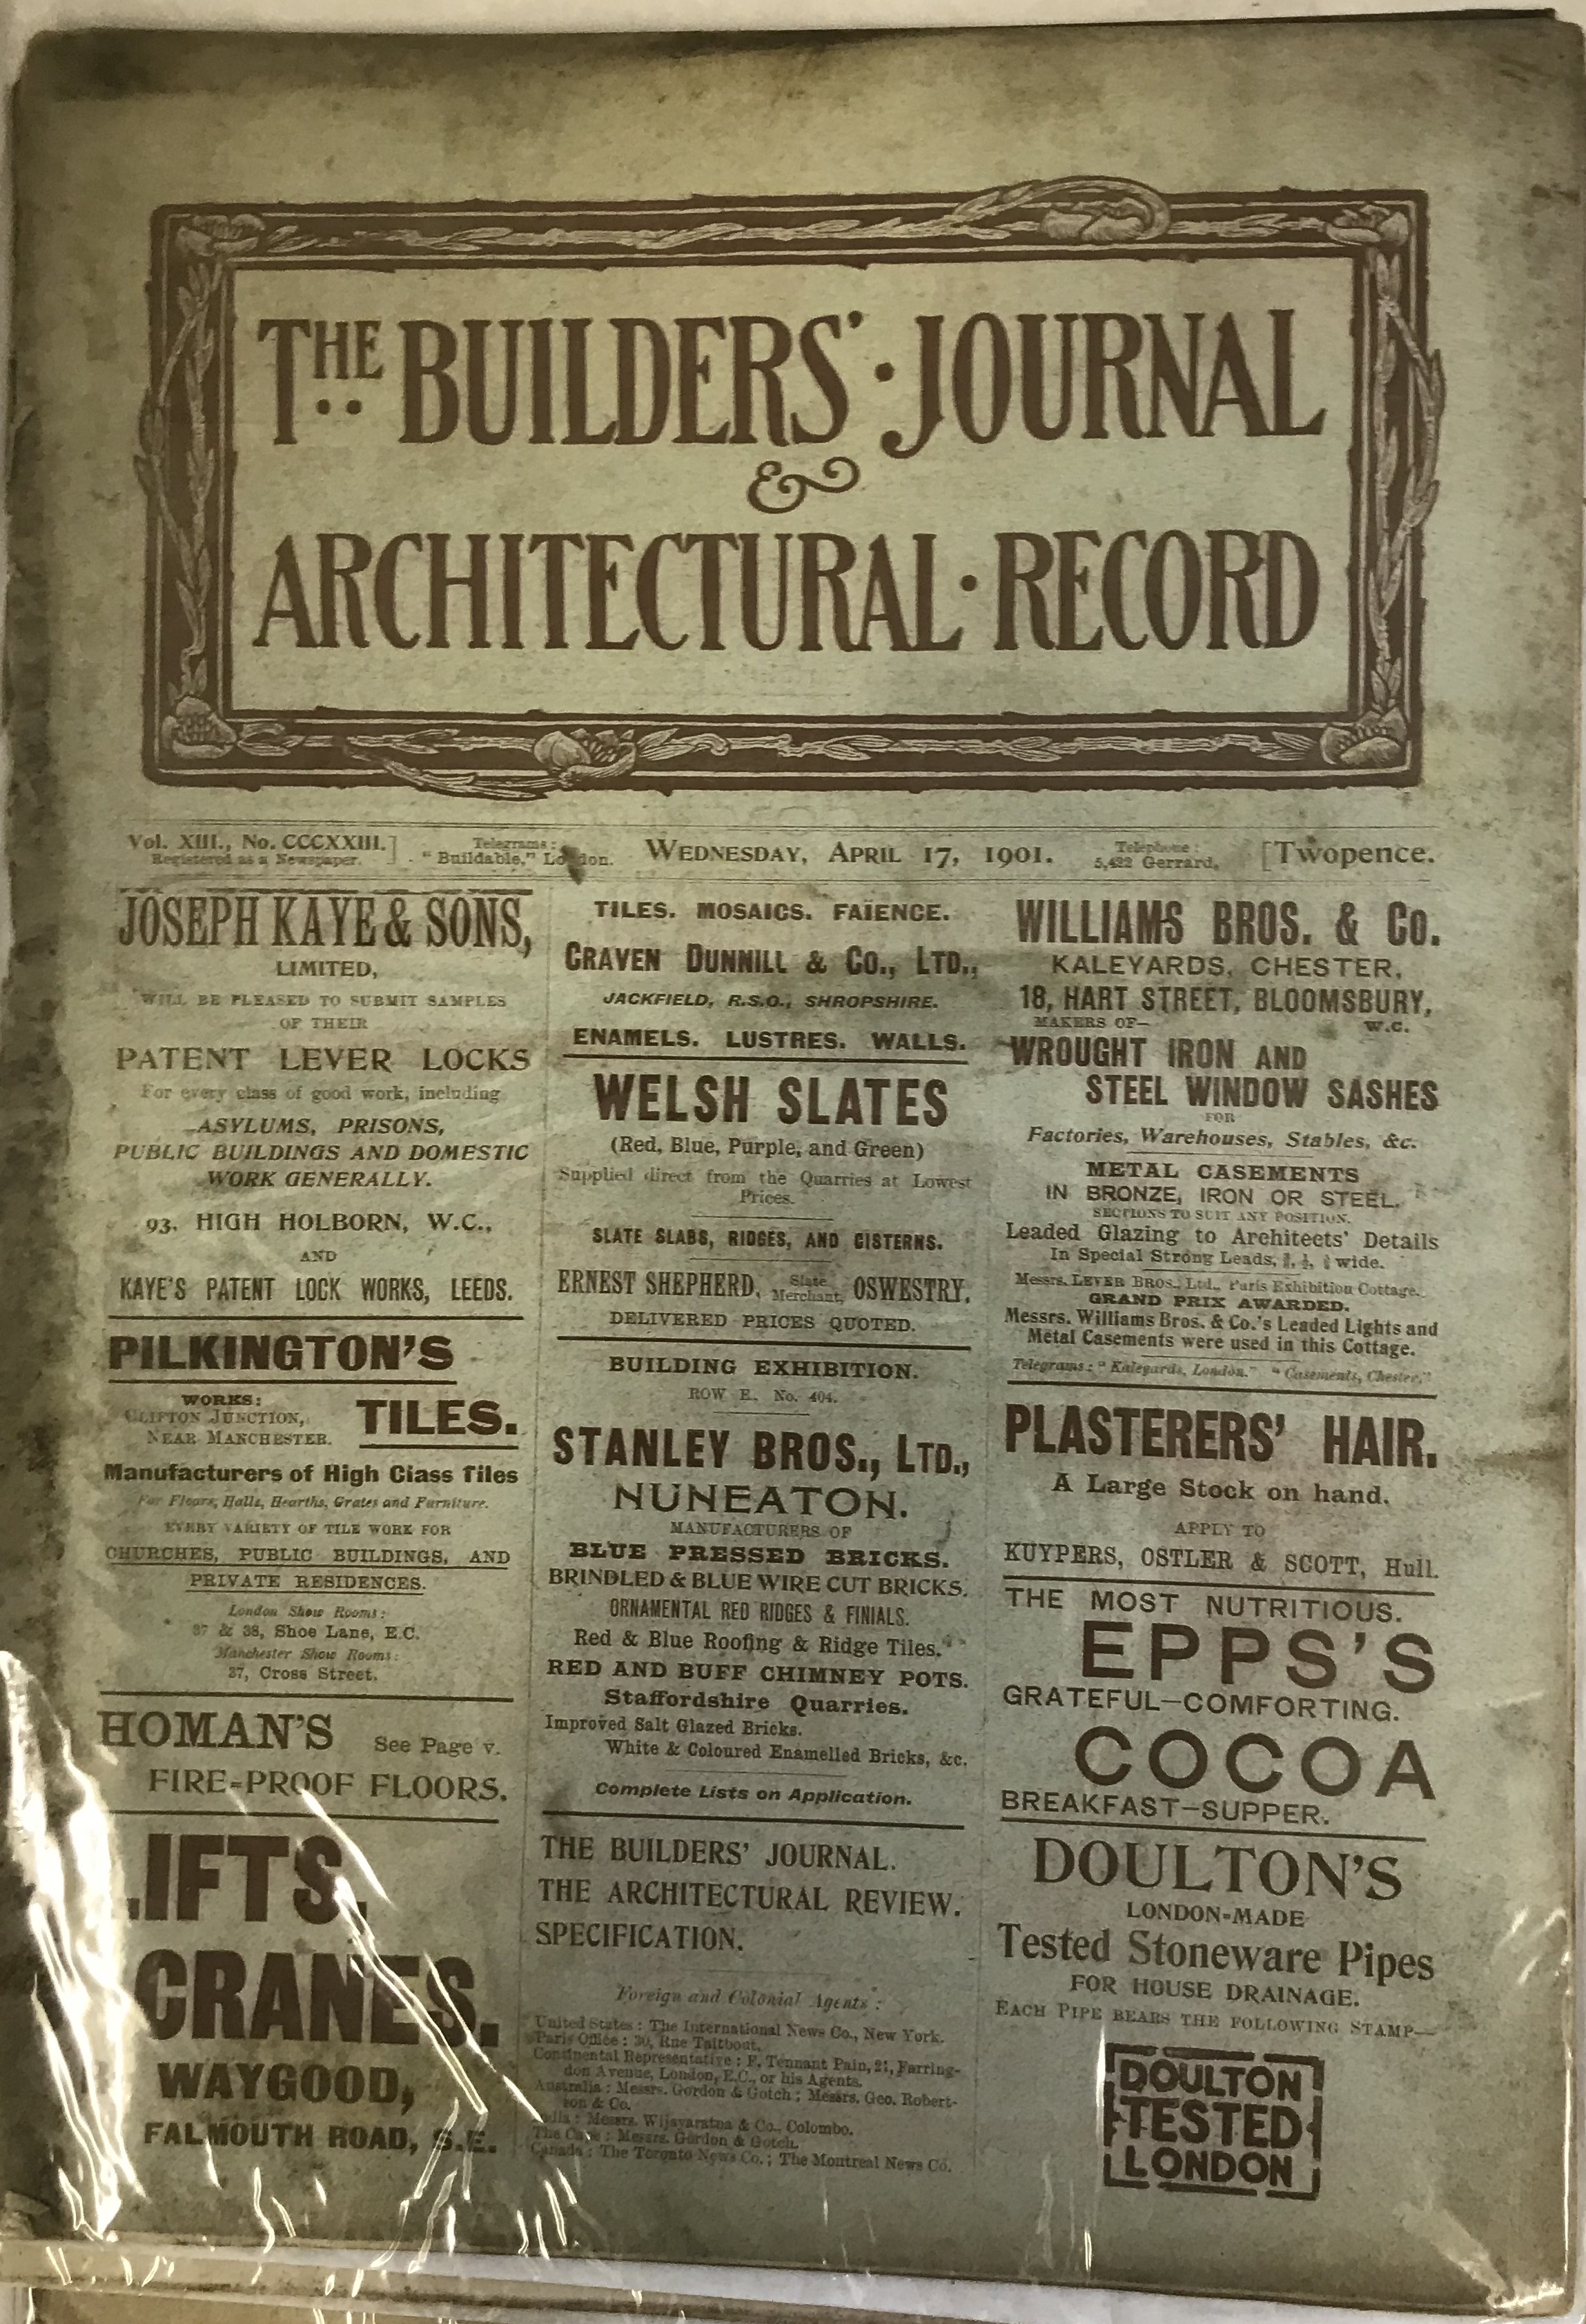 THE BUILDERS JOURNAL 1899 -1902 - Image 12 of 18